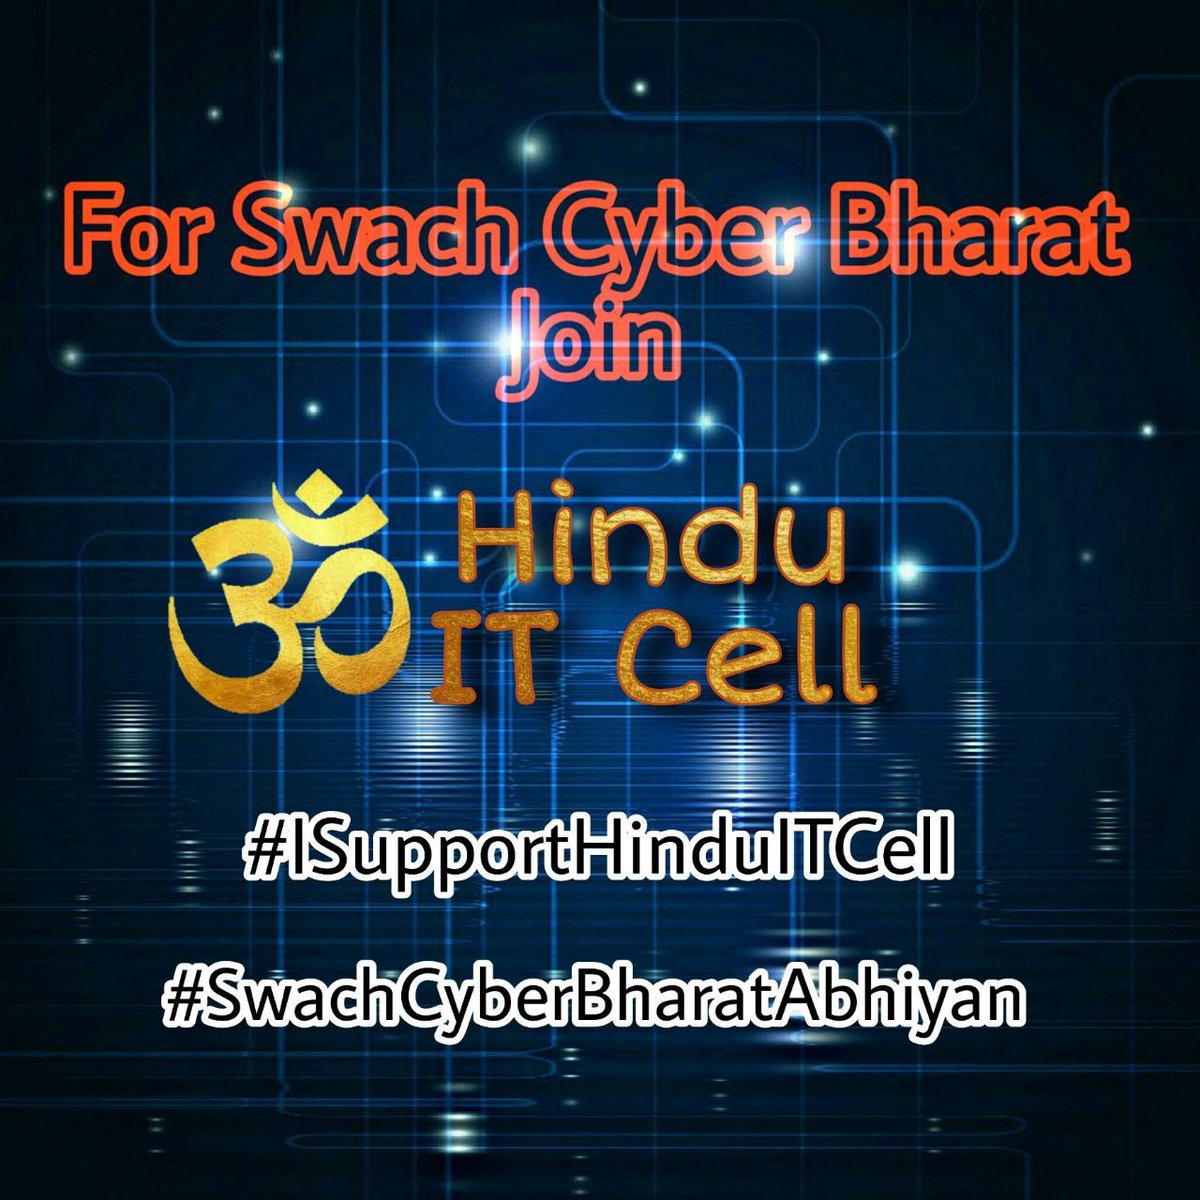 #isupporthinduitcell 
#ISupportHinduITCell 
Cyber pests are a threat to the unity of this country. #Bharat